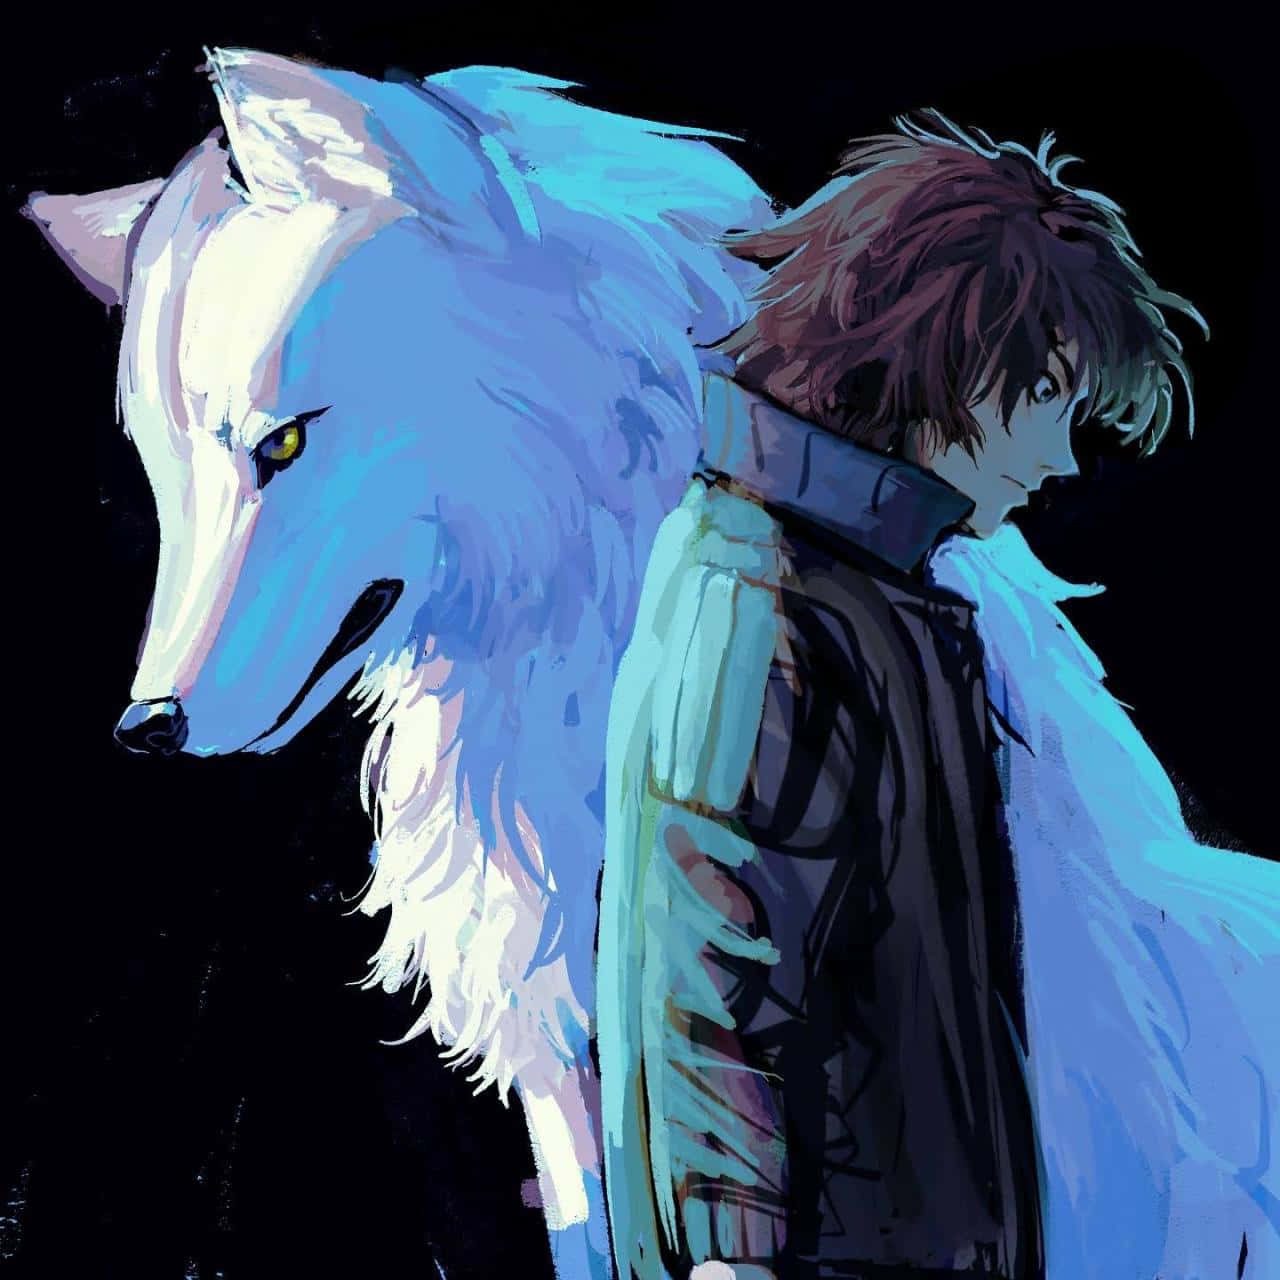 Kiba, the enigmatic white wolf, staring intently against a starry backdrop in the iconic anime series, Wolf's Rain. Wallpaper